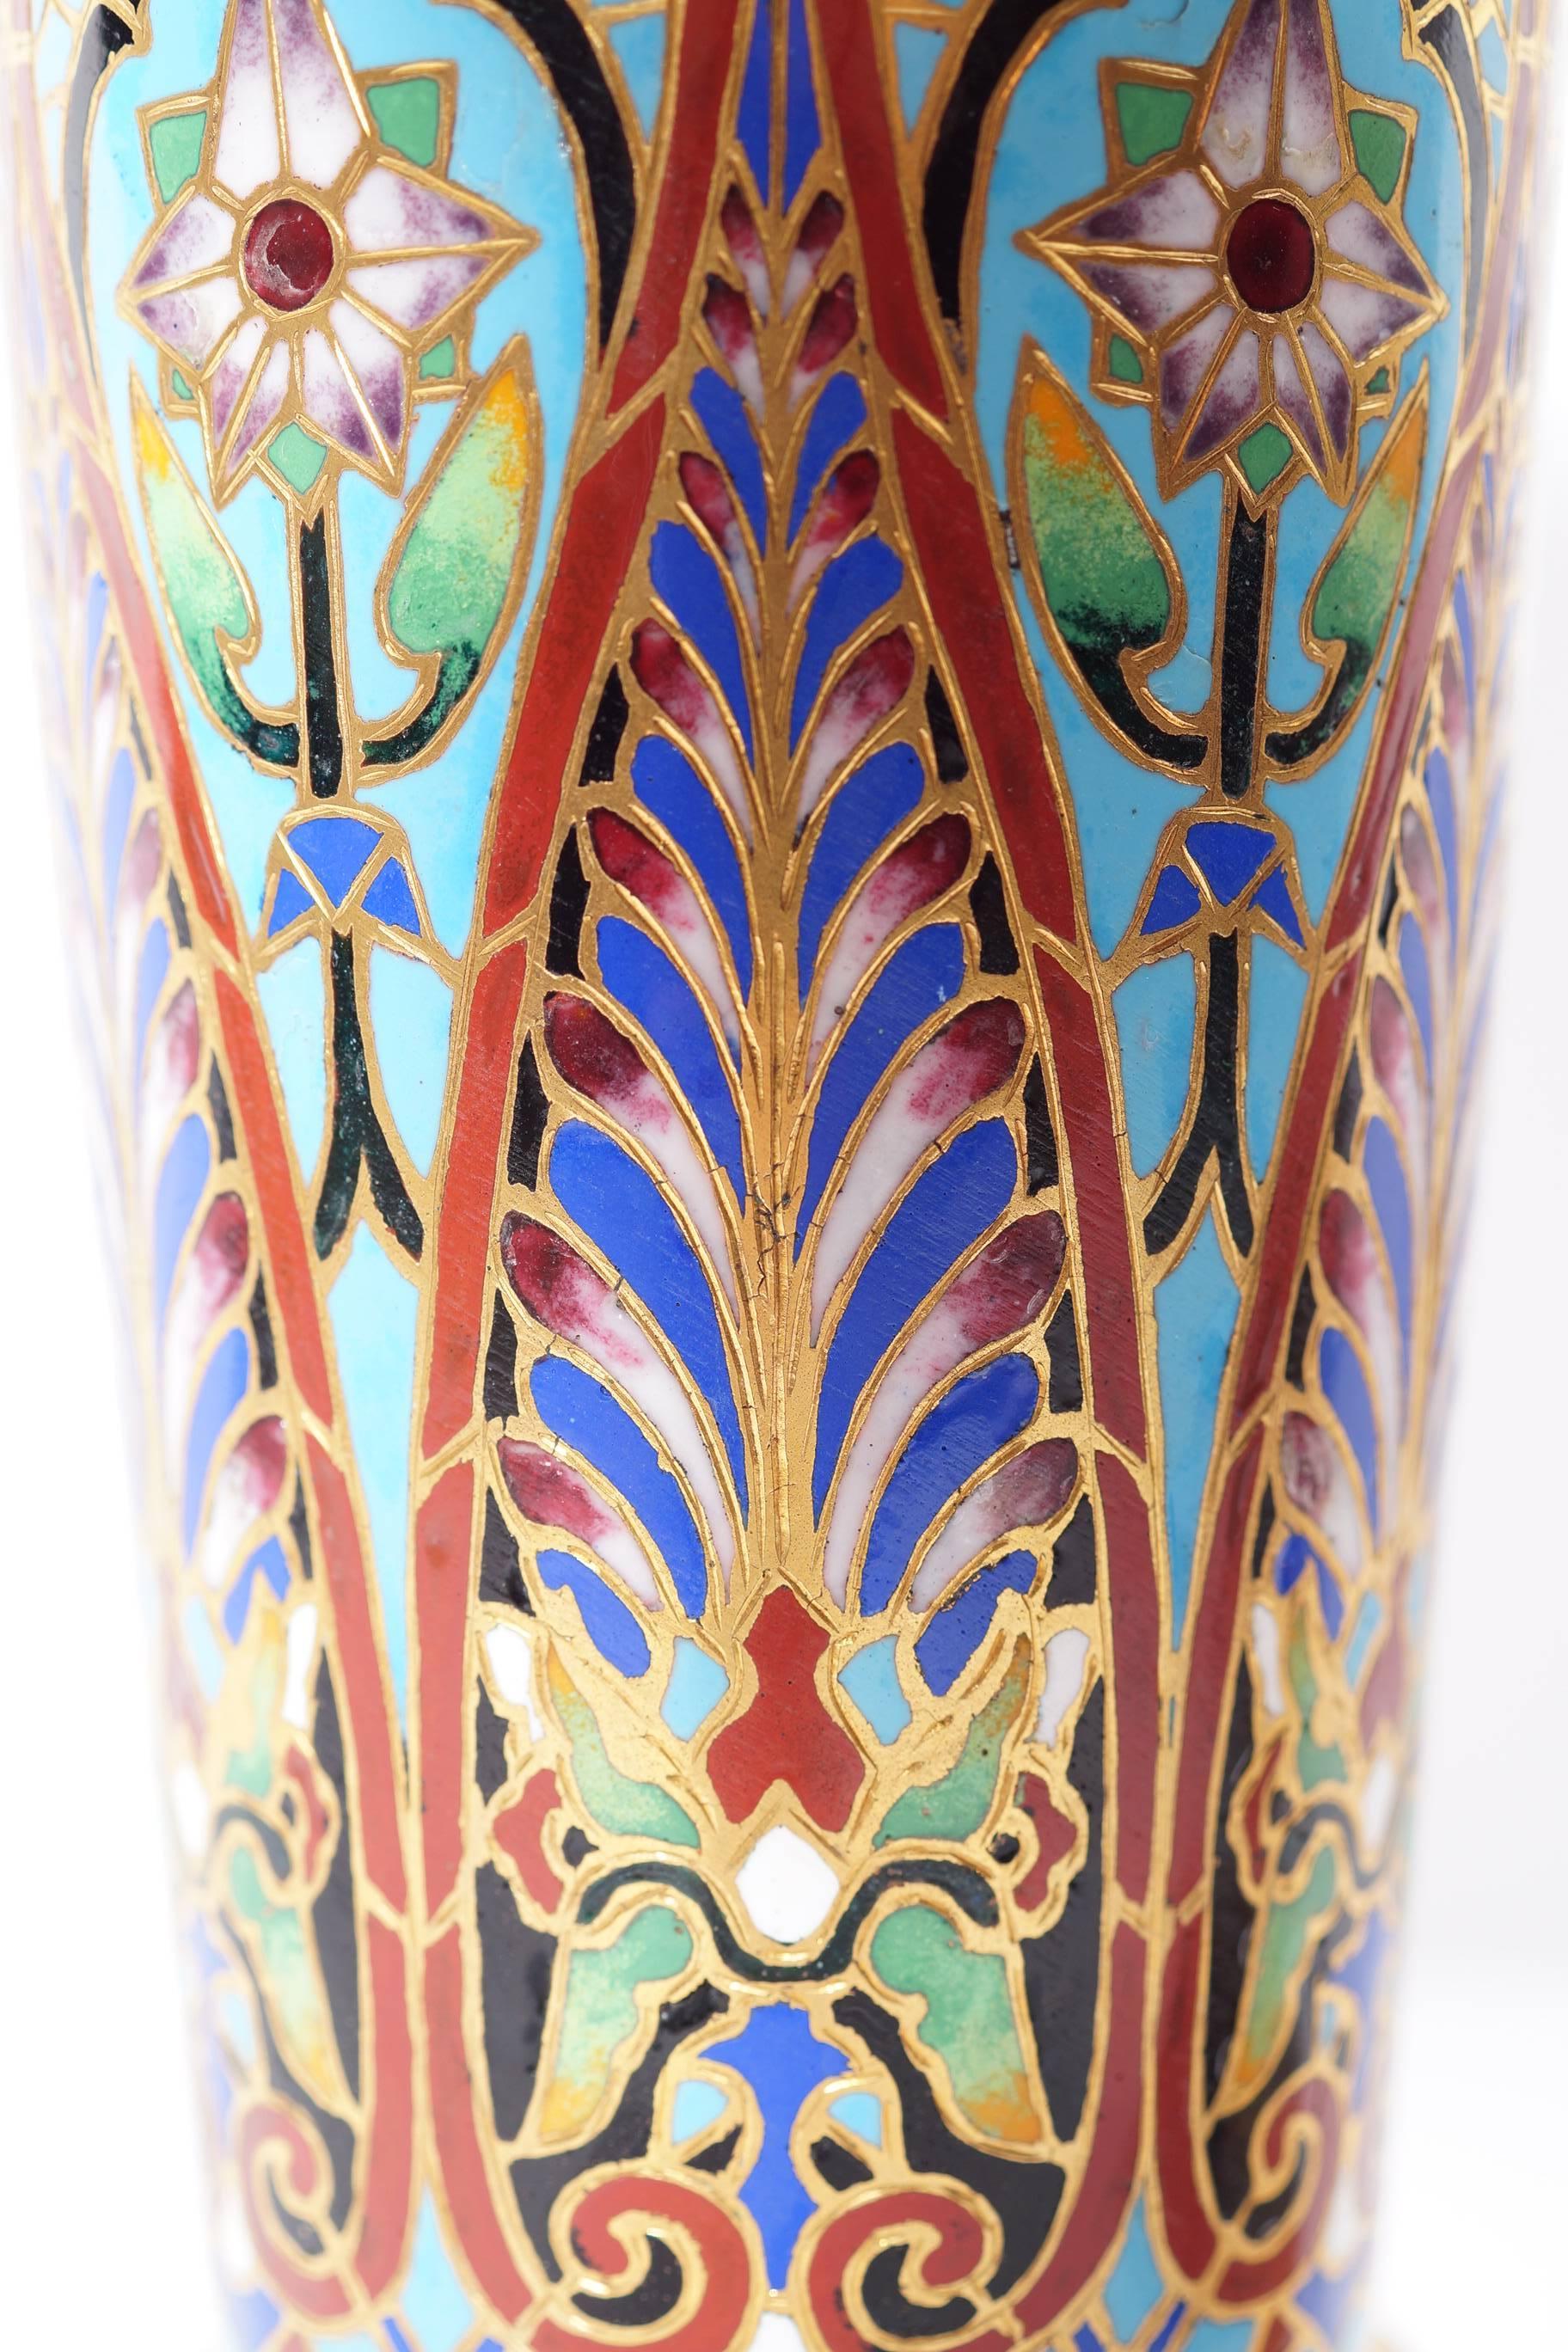 Pair of French 19th century champlevé enamel vases with feather design motif.